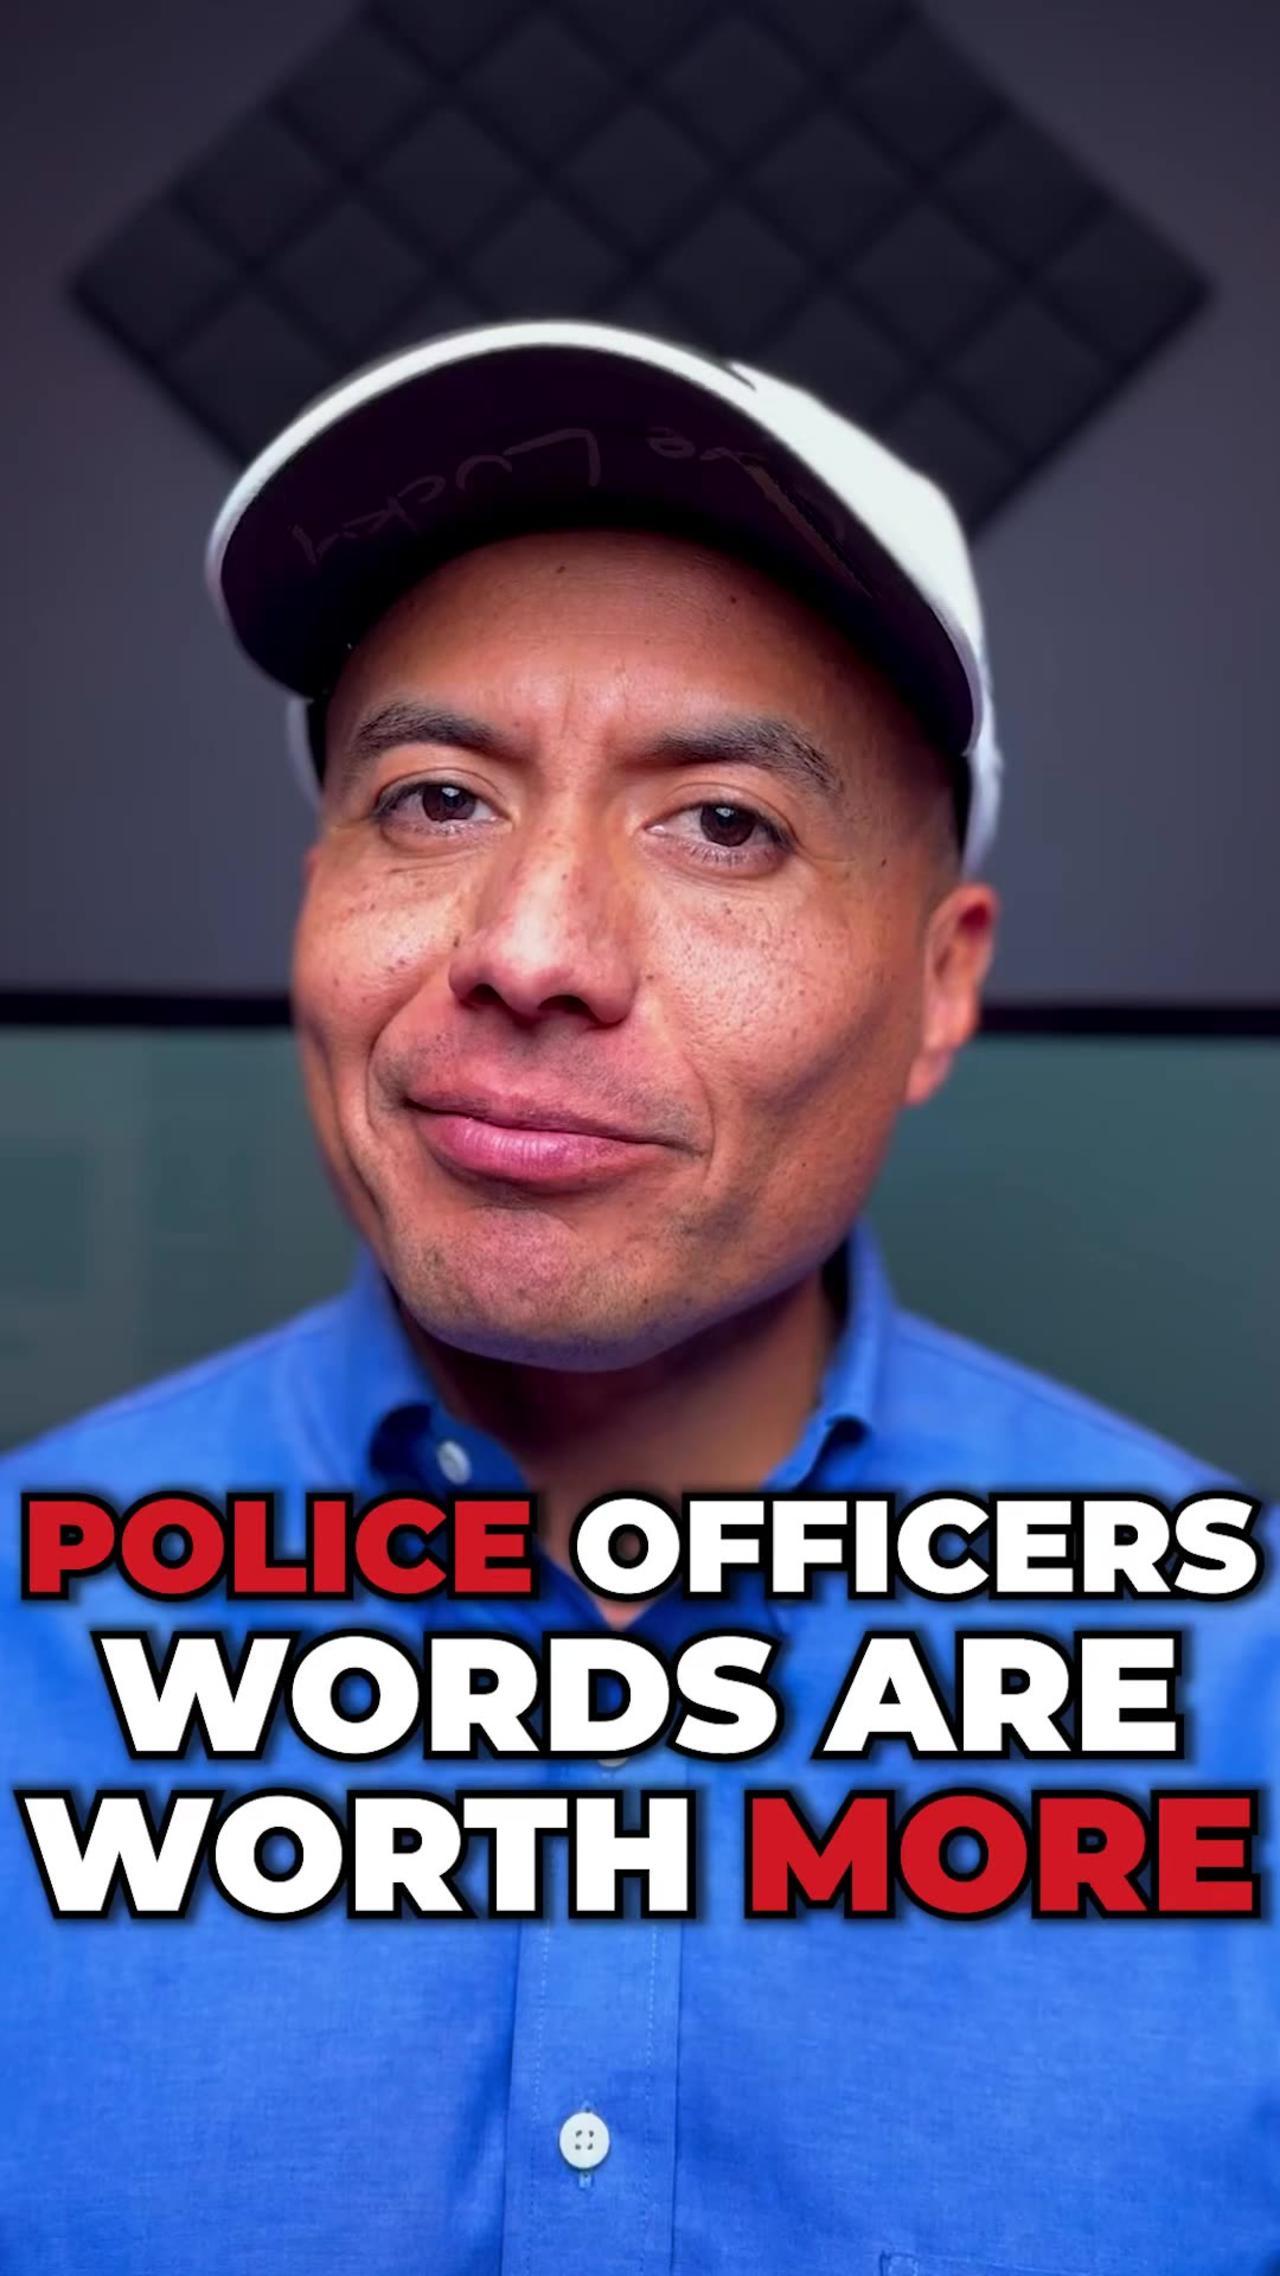 Police Officers Words Are Worth More